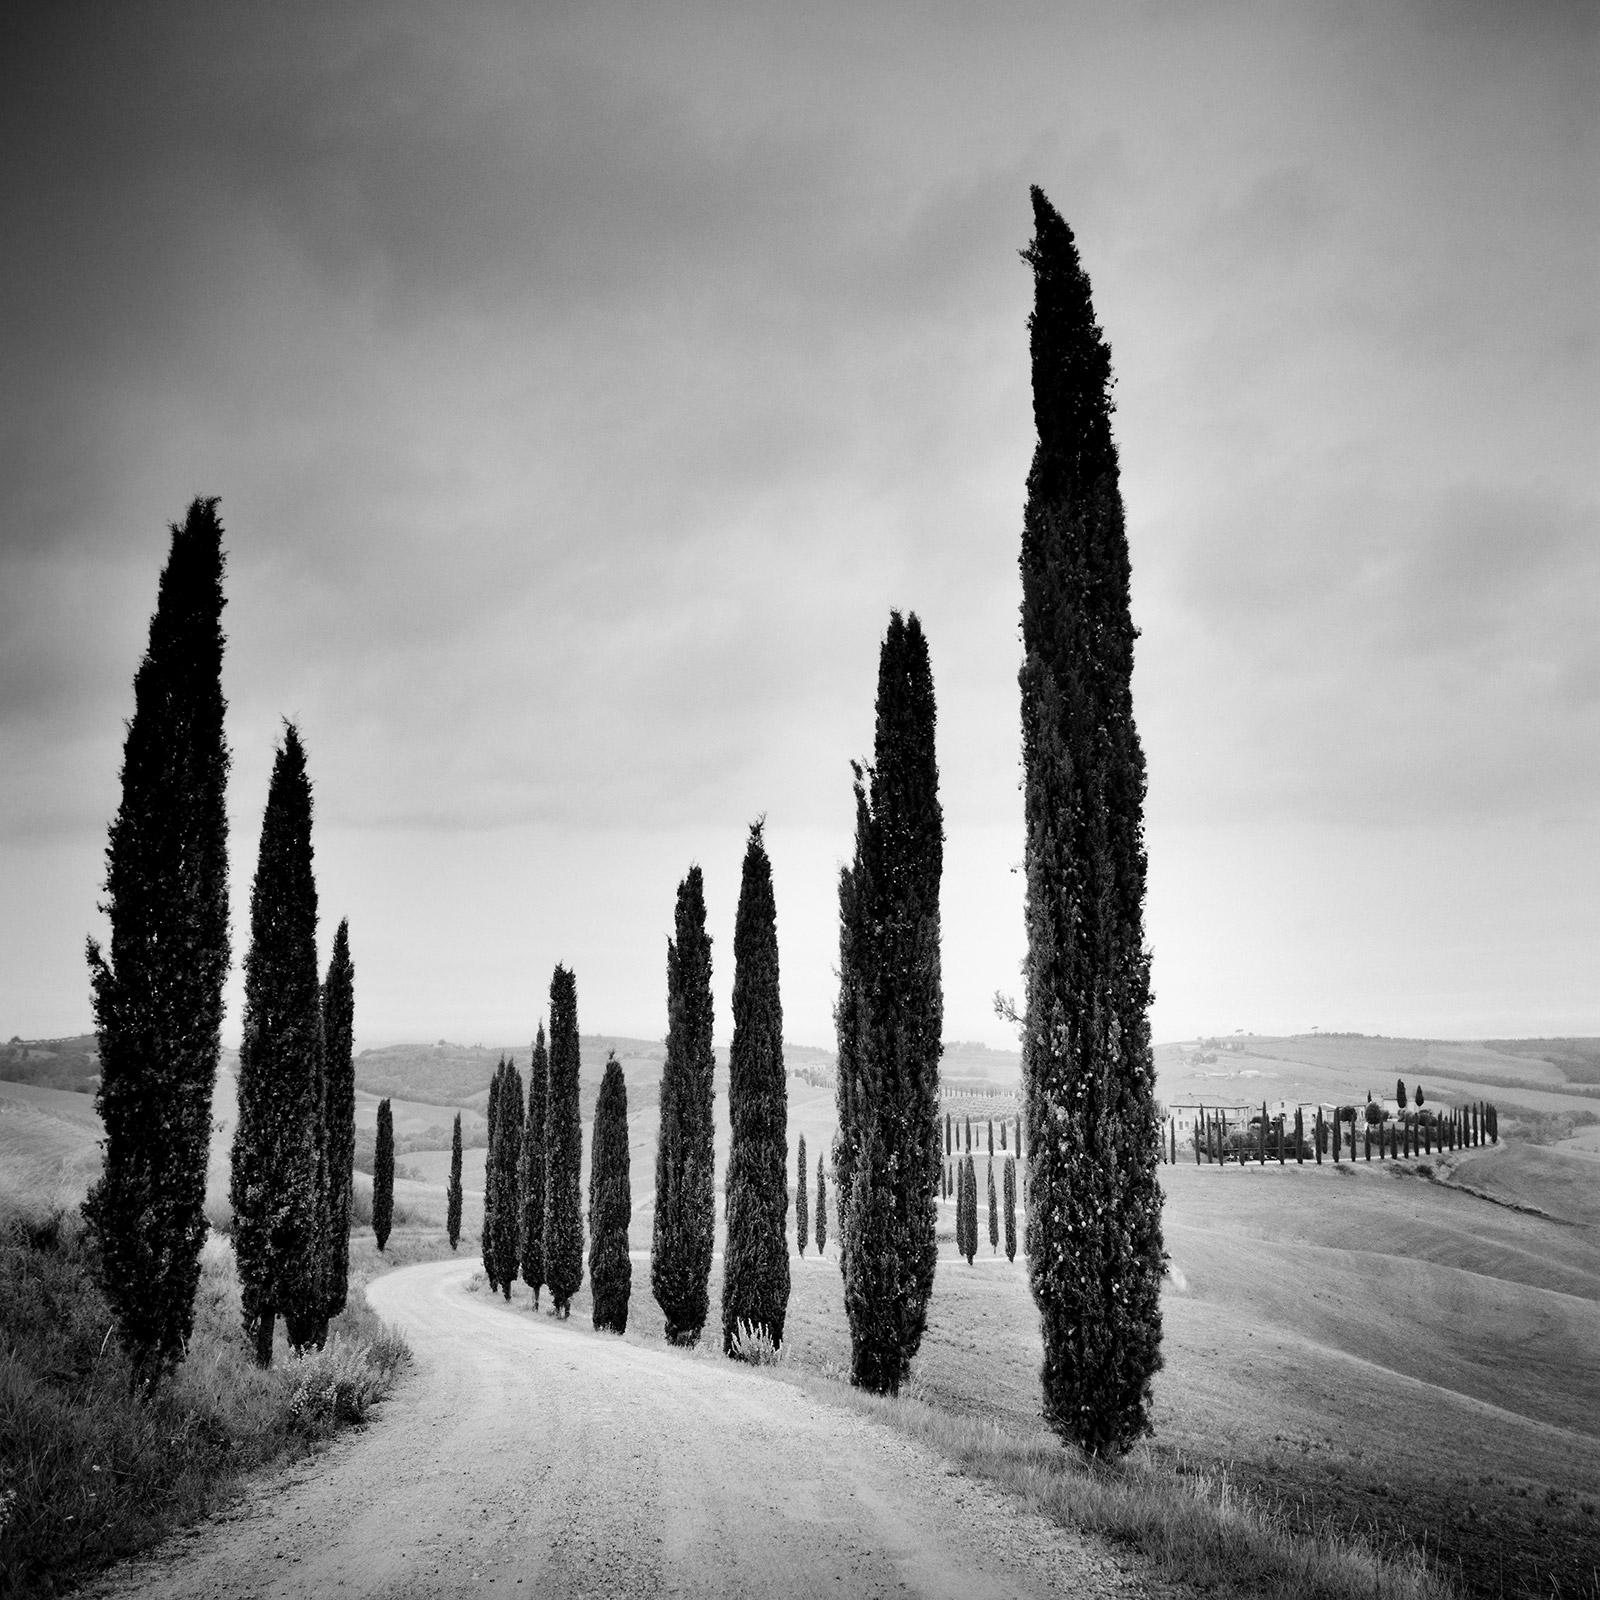 Cypress Trees along the Road, Tuscany, black and white photography, landscape